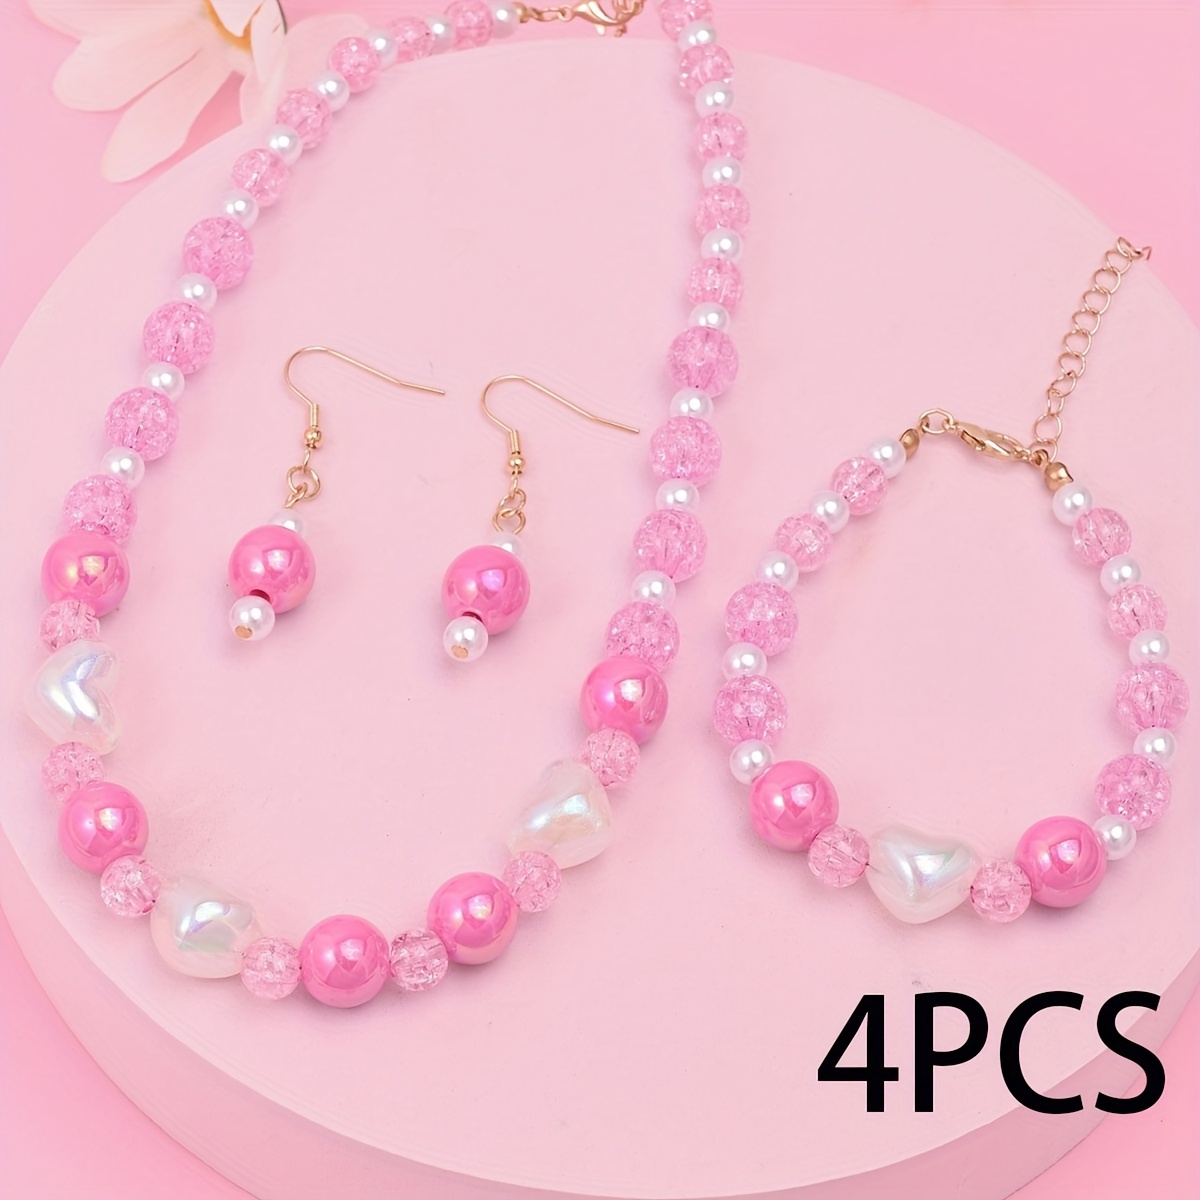 4pcs Earrings + Necklace + Bracelet Coquette Style Jewelry, Jewels Set Made of Beads Match Daily Outfits Sweet Gift for Female,Temu